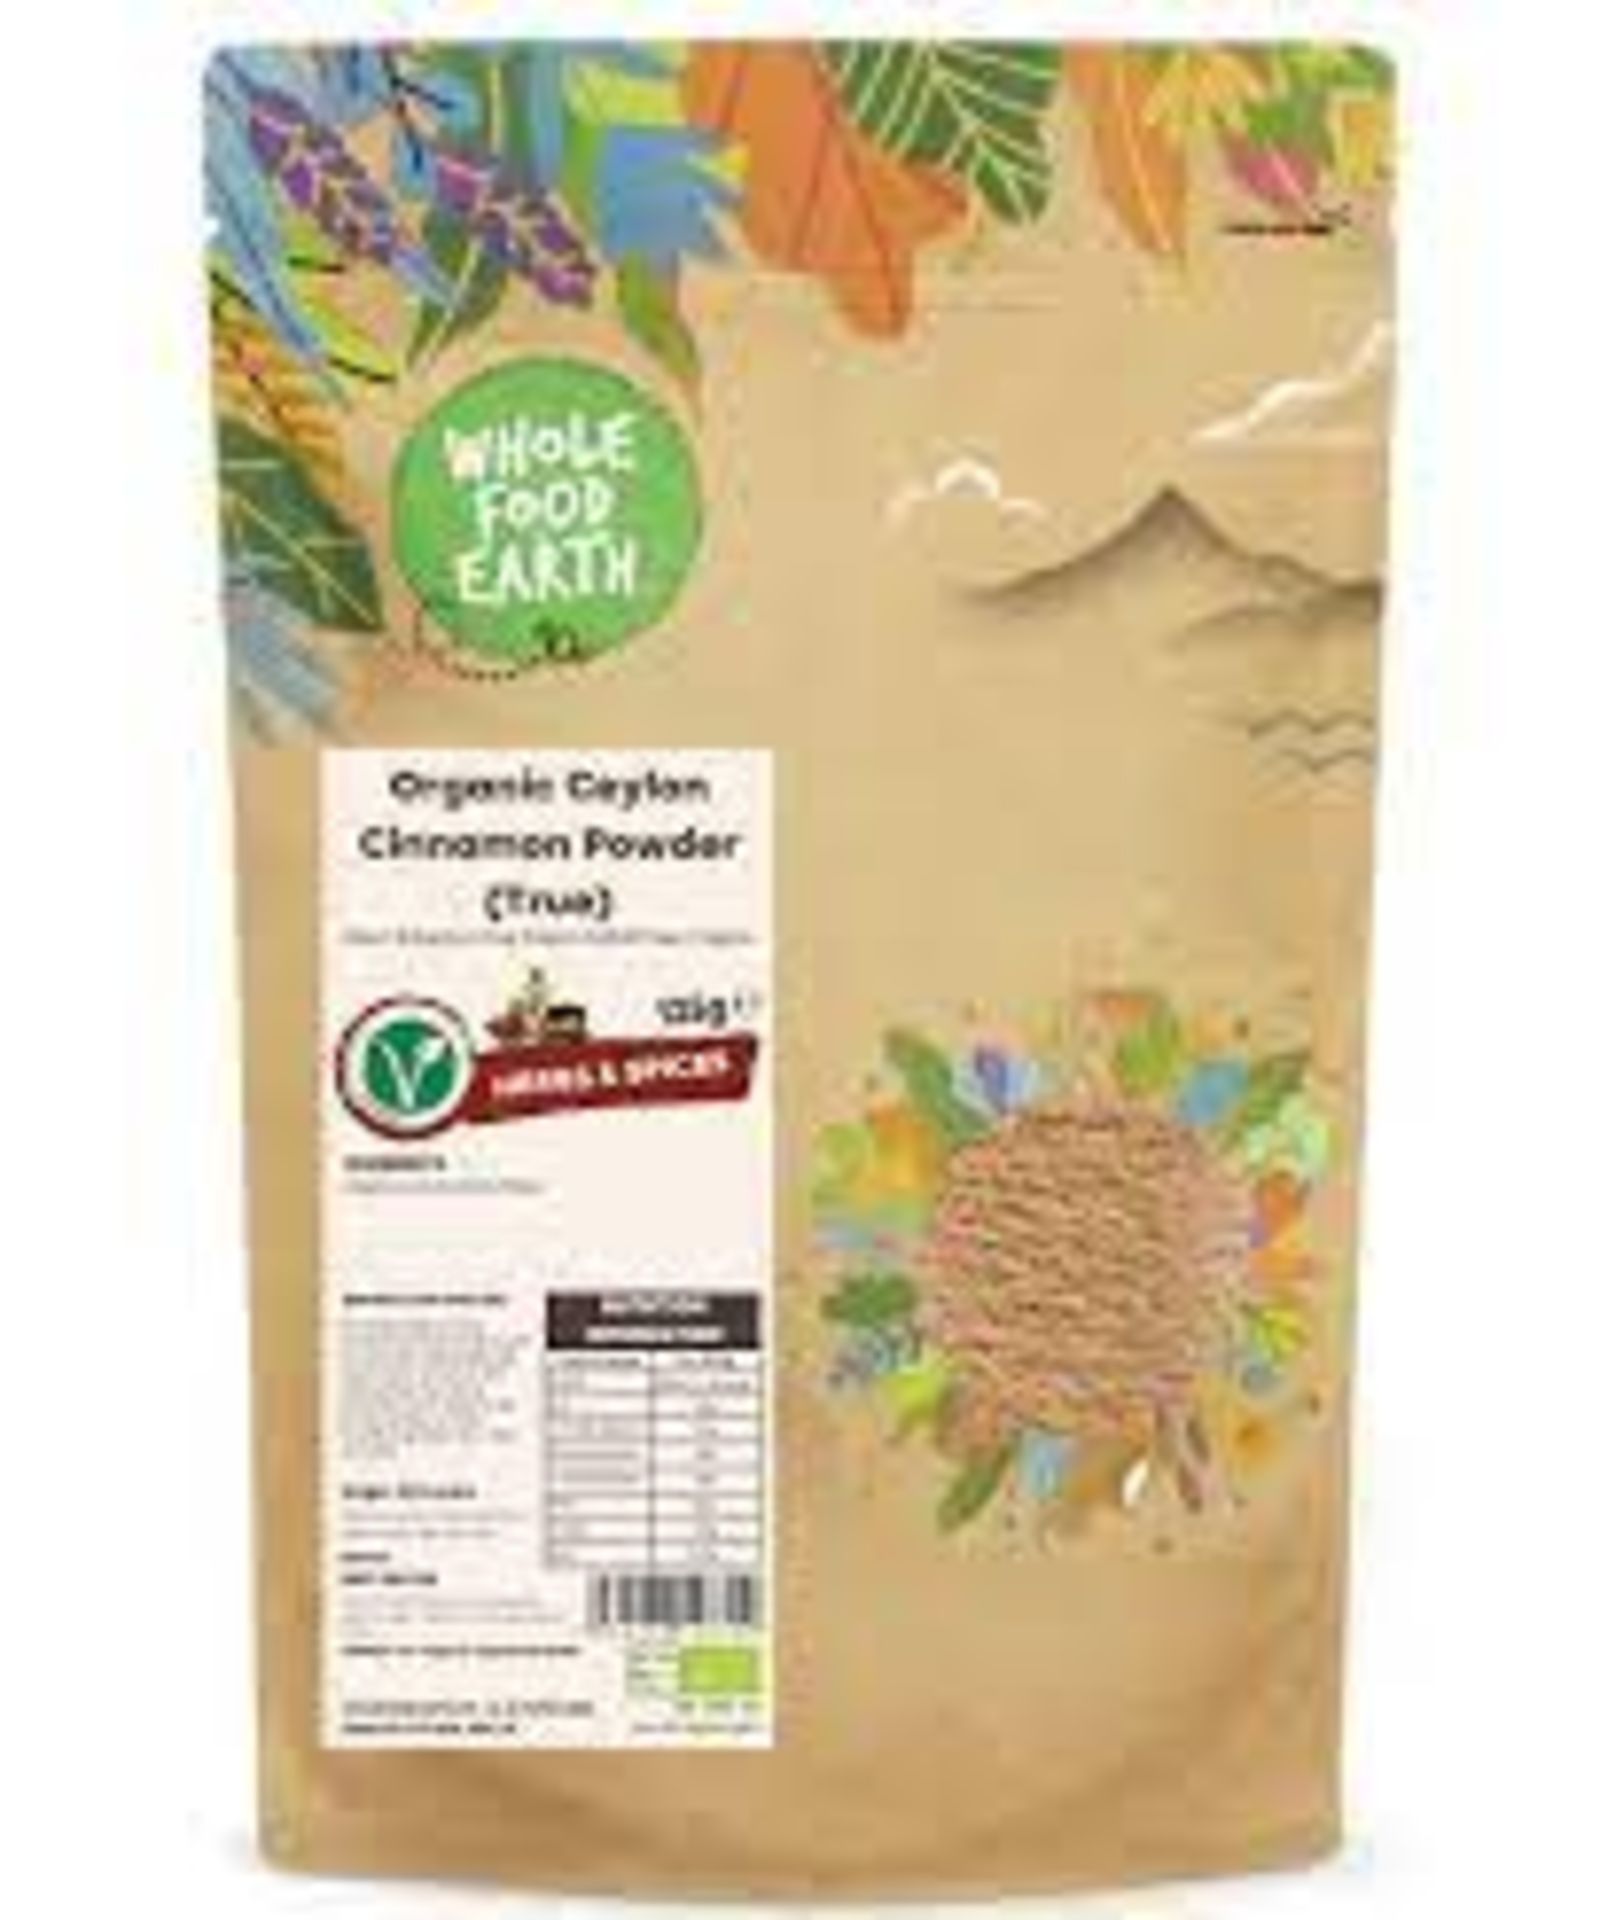 RRP £1556 (Approx. Count 154) spW37c7716H (1) 16 x Tahini Spice Blend, 30g 15 x Wholefood Earth - Image 2 of 3